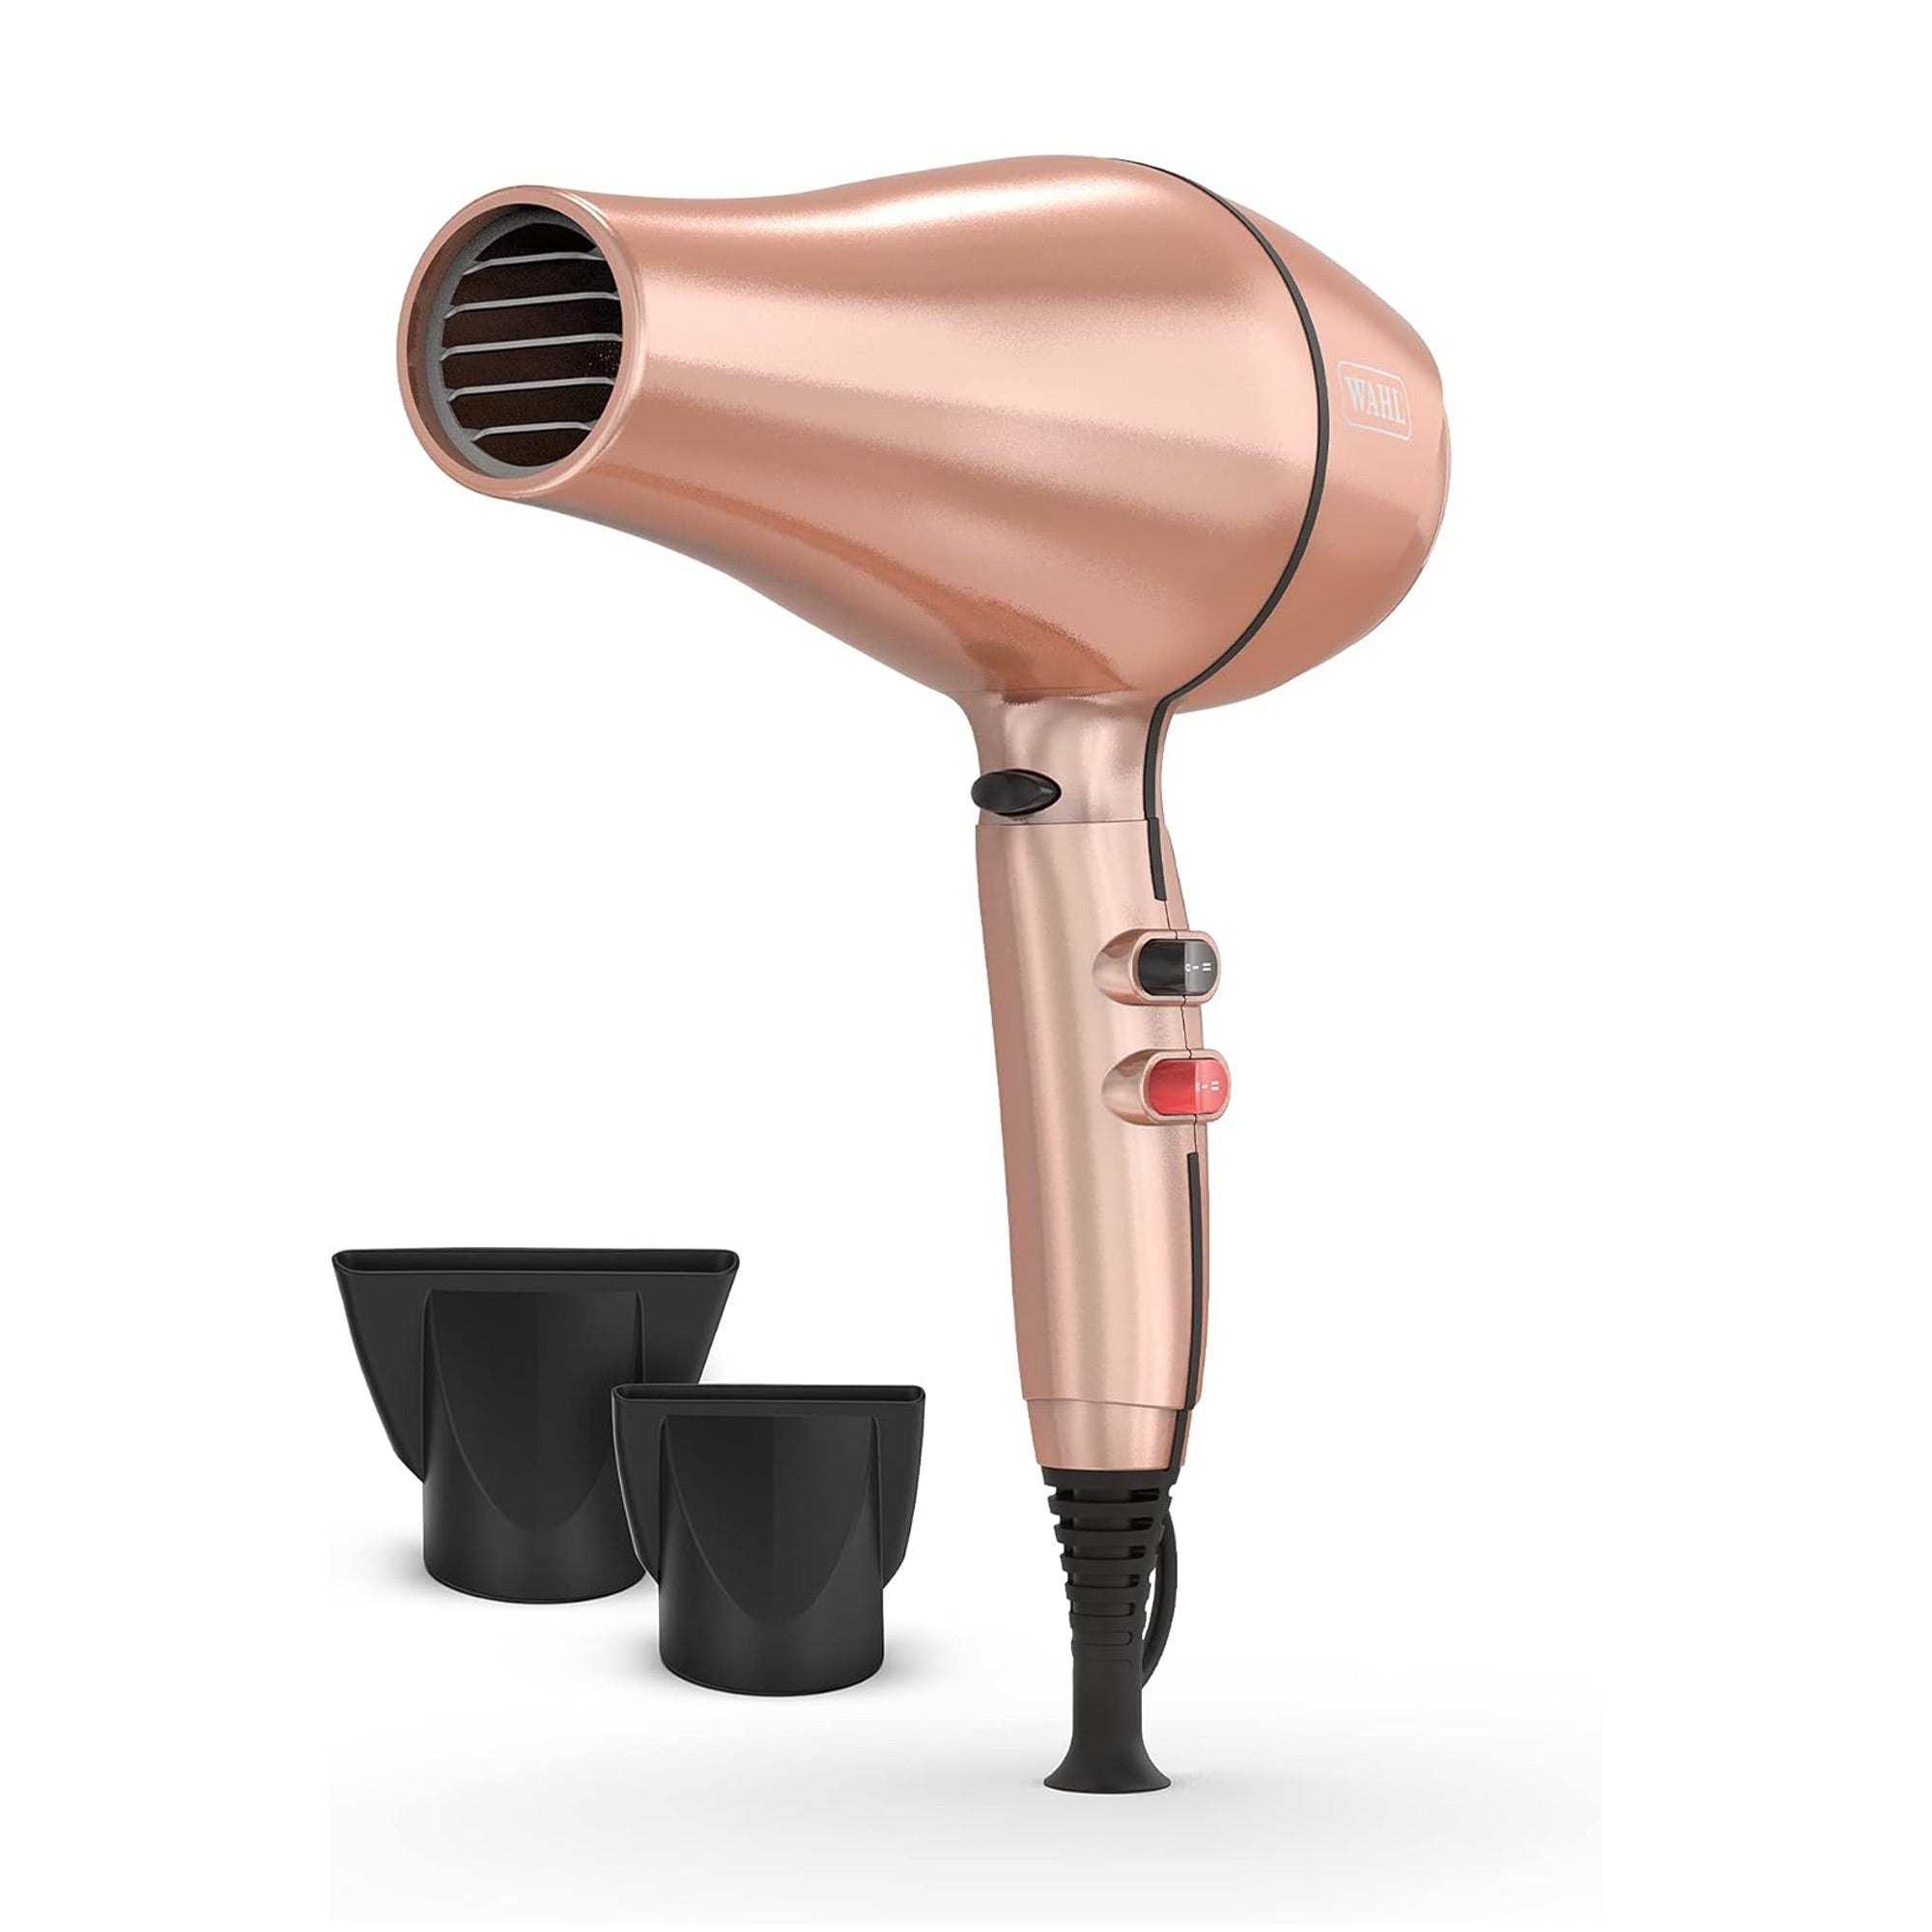 Wahl - Pro Keratin Dryer Rose Gold Special Edition 2200W